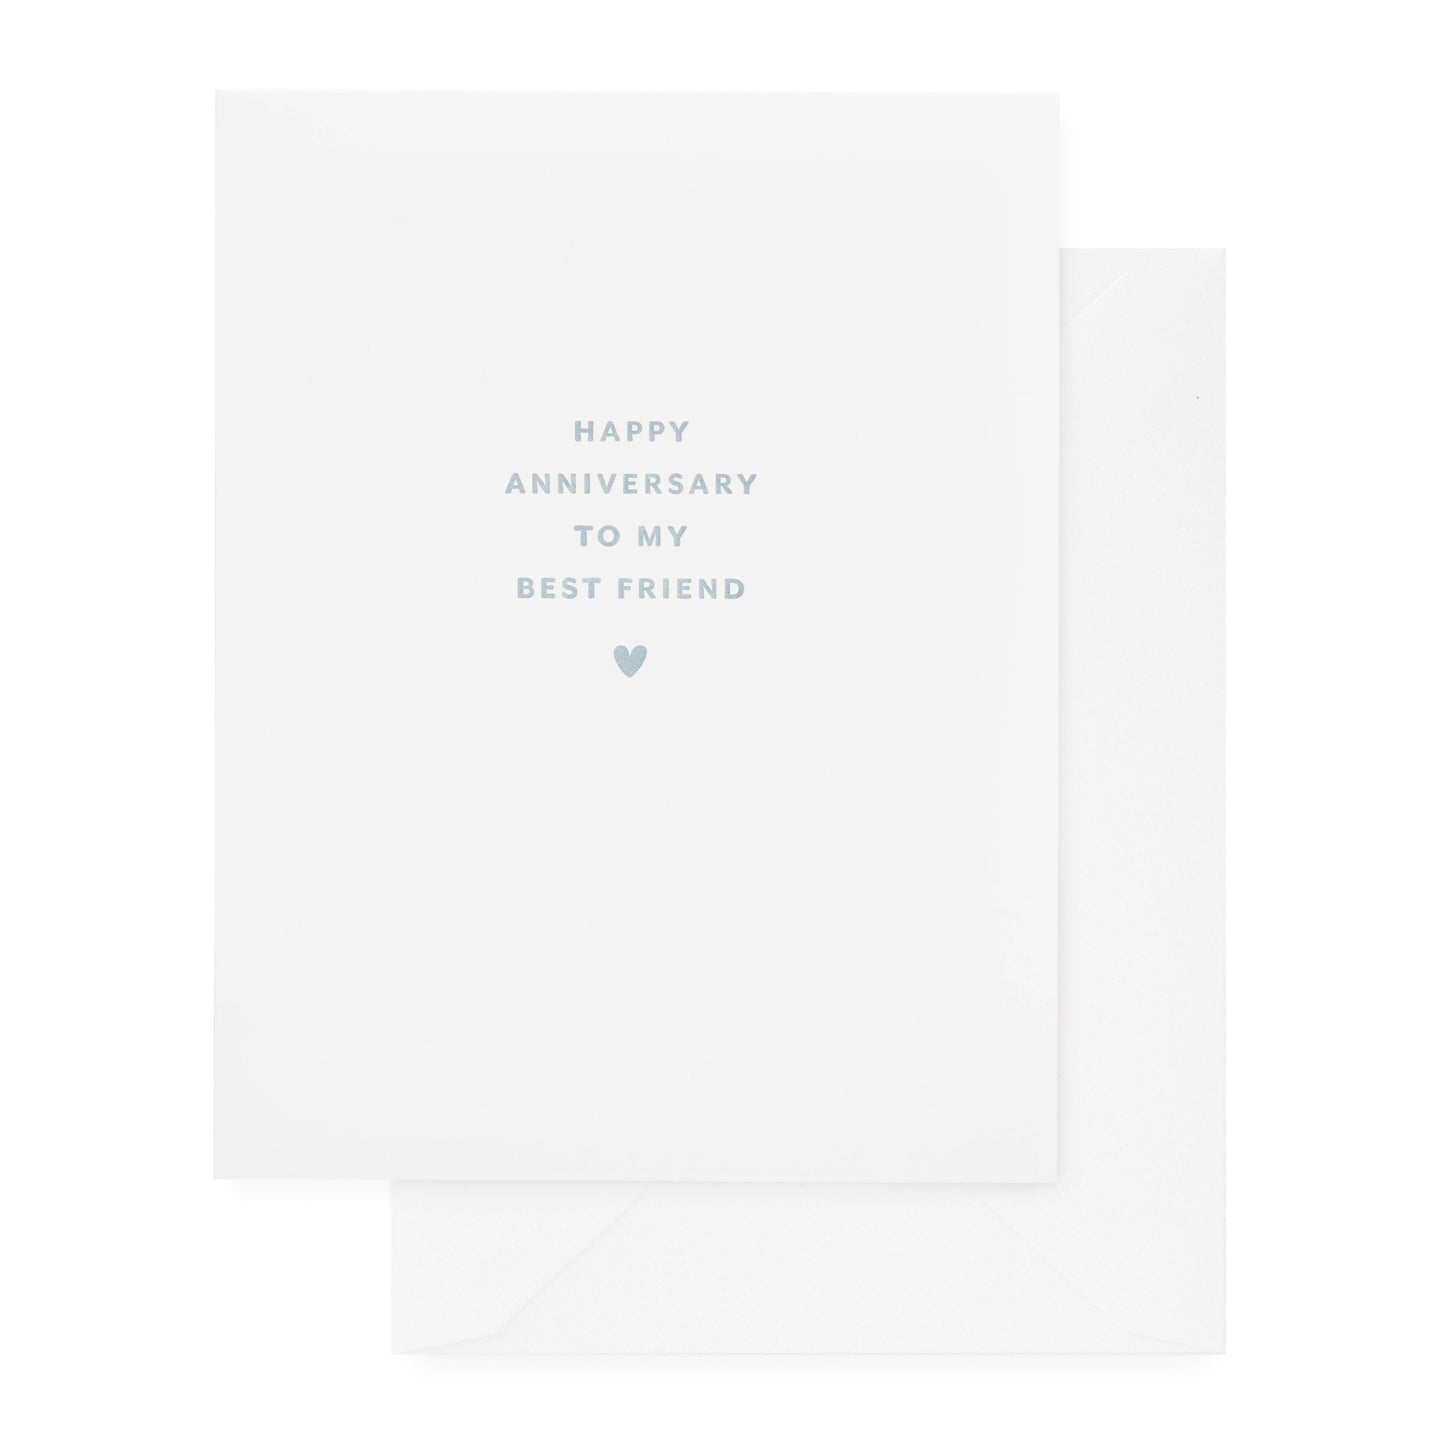 white anniversary card with slate blue text and white envelope